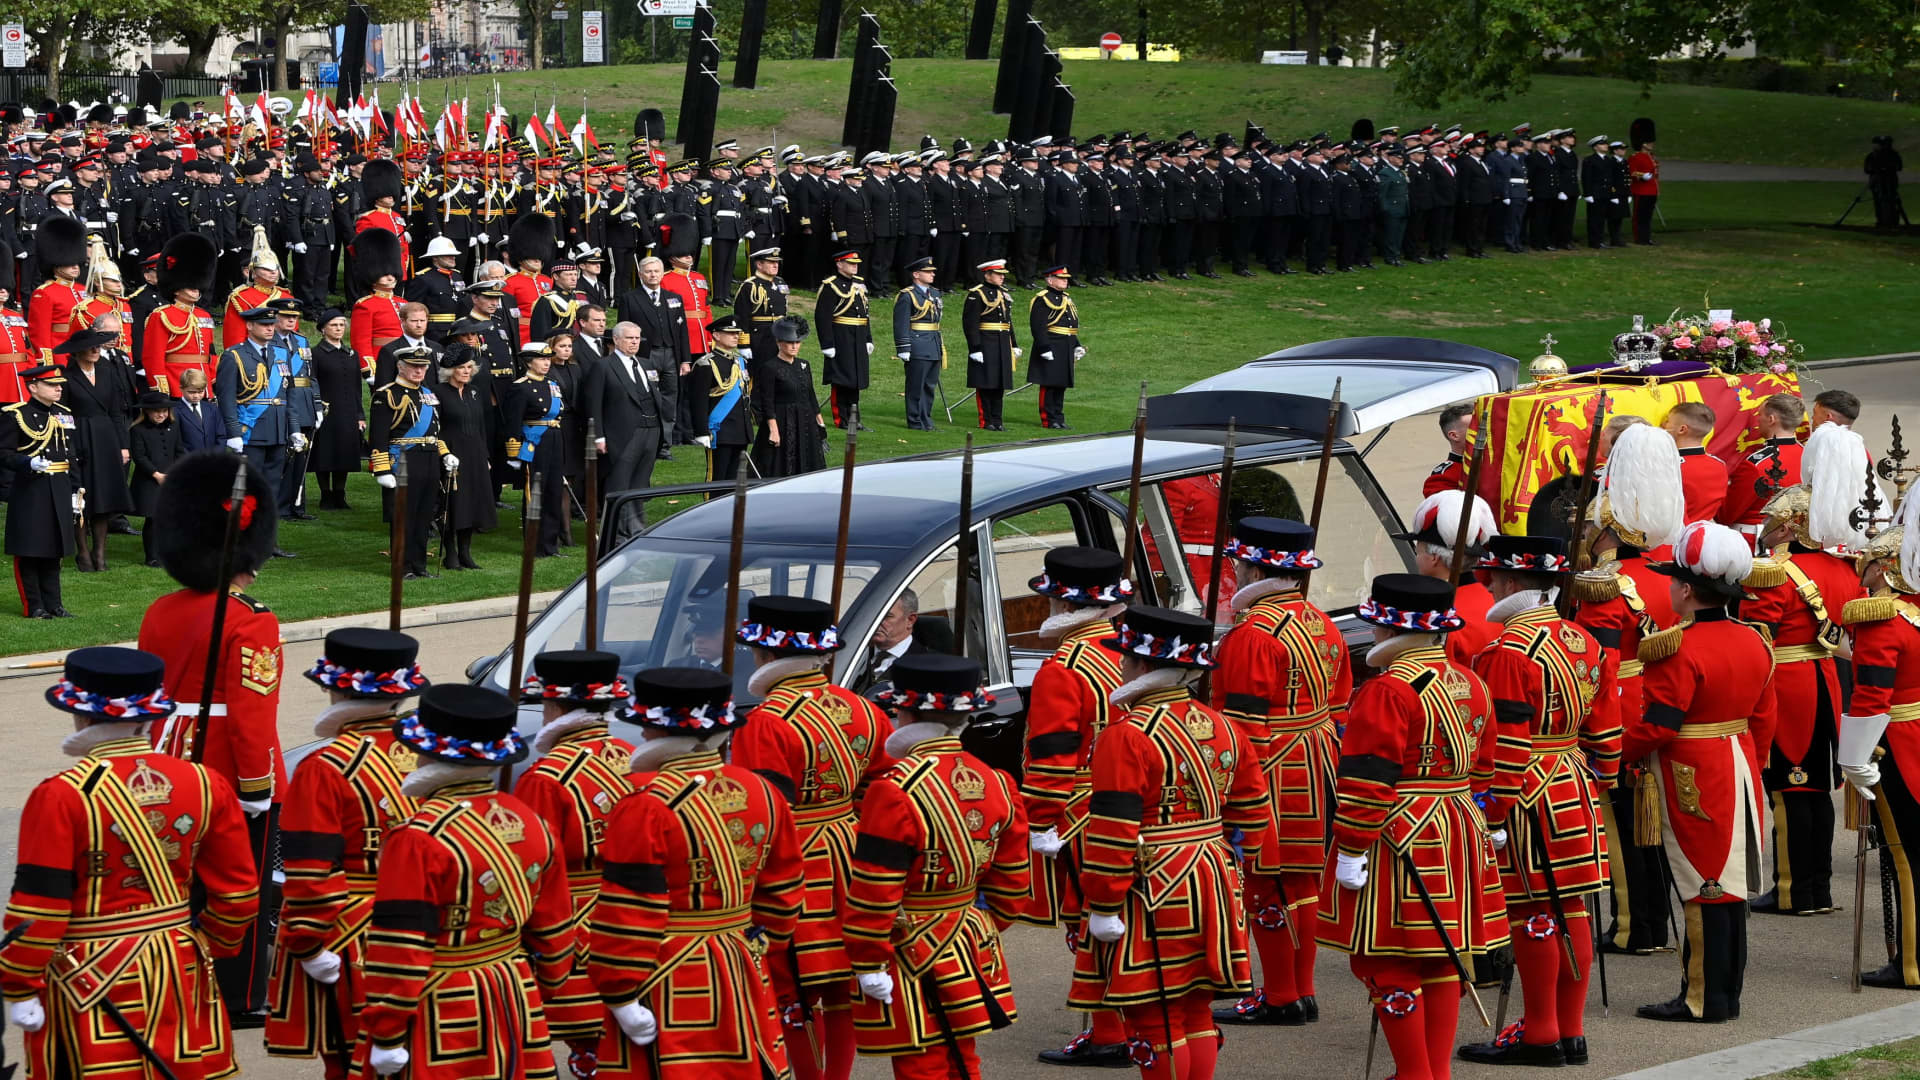 Members of the British royal family and members of the military stand as the coffin of Britain's Queen Elizabeth is carried to a hearse to be taken from Wellington Arch to Windsor Castle on the day of her state funeral and burial, in London, Britain, September 19, 2022